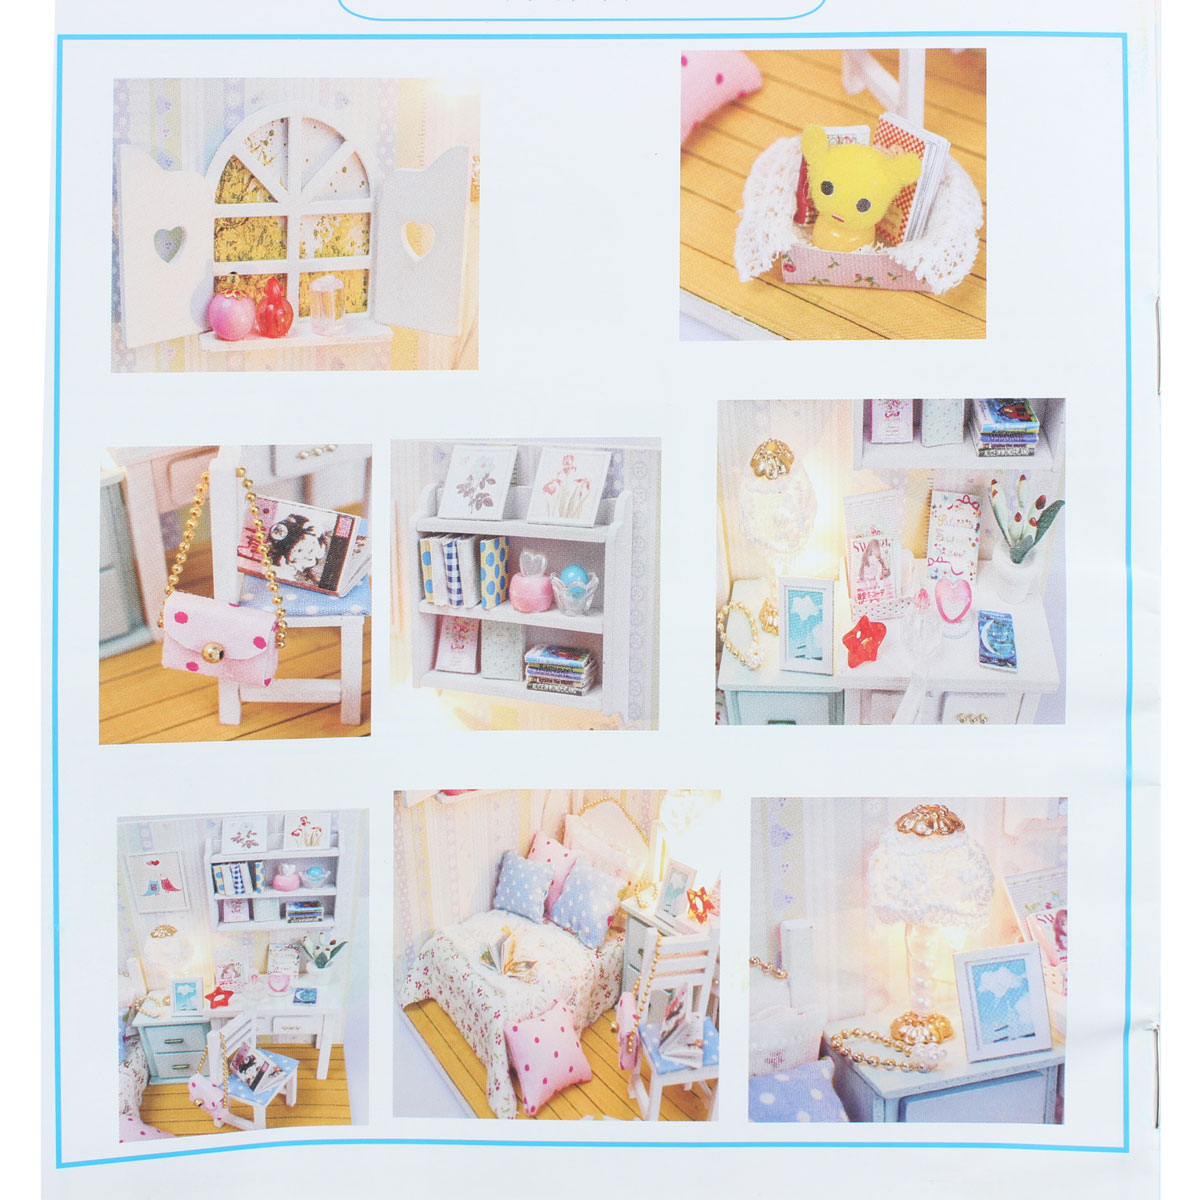 Hoomeda-DIY-Wood-Dollhouse-Miniature-With-LED-Furniture-Cover-Doll-House-Room-1019741-3